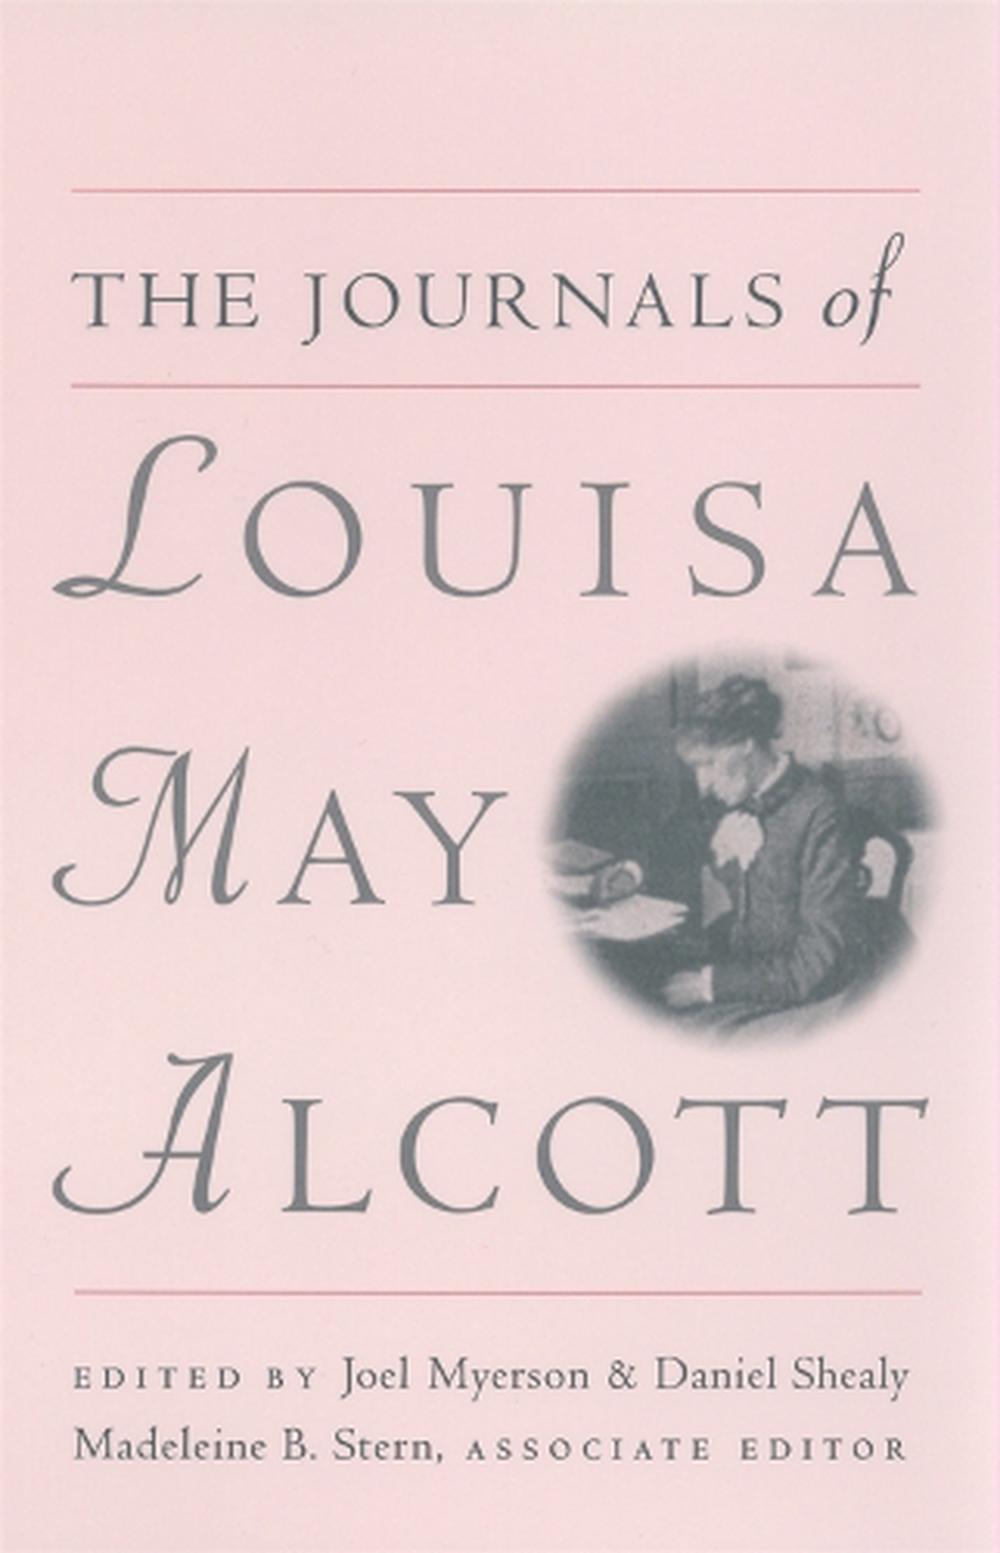 The Journals of Louisa May Alcott by Louisa May Alcott (English) Paperback Book 9780820319506 | eBay